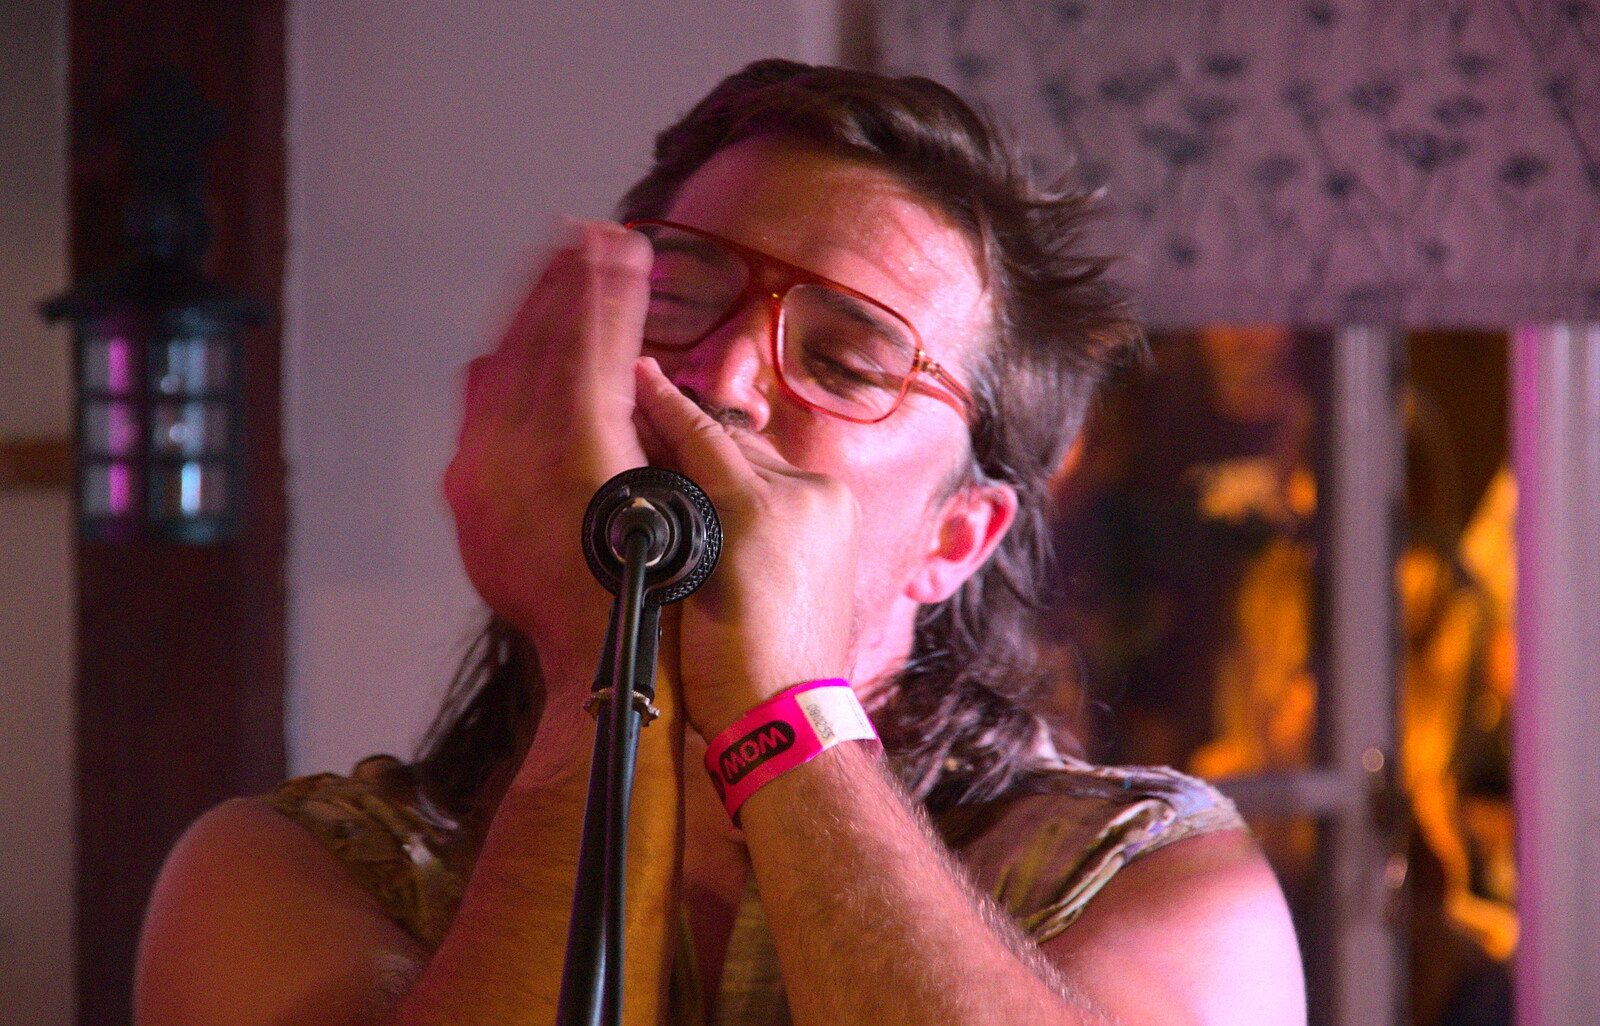 Bobby Fitzgerald plays a bit of harmonica from The Whiskey Shivers at The Crown, Burston, Norfolk - 1st August 2018